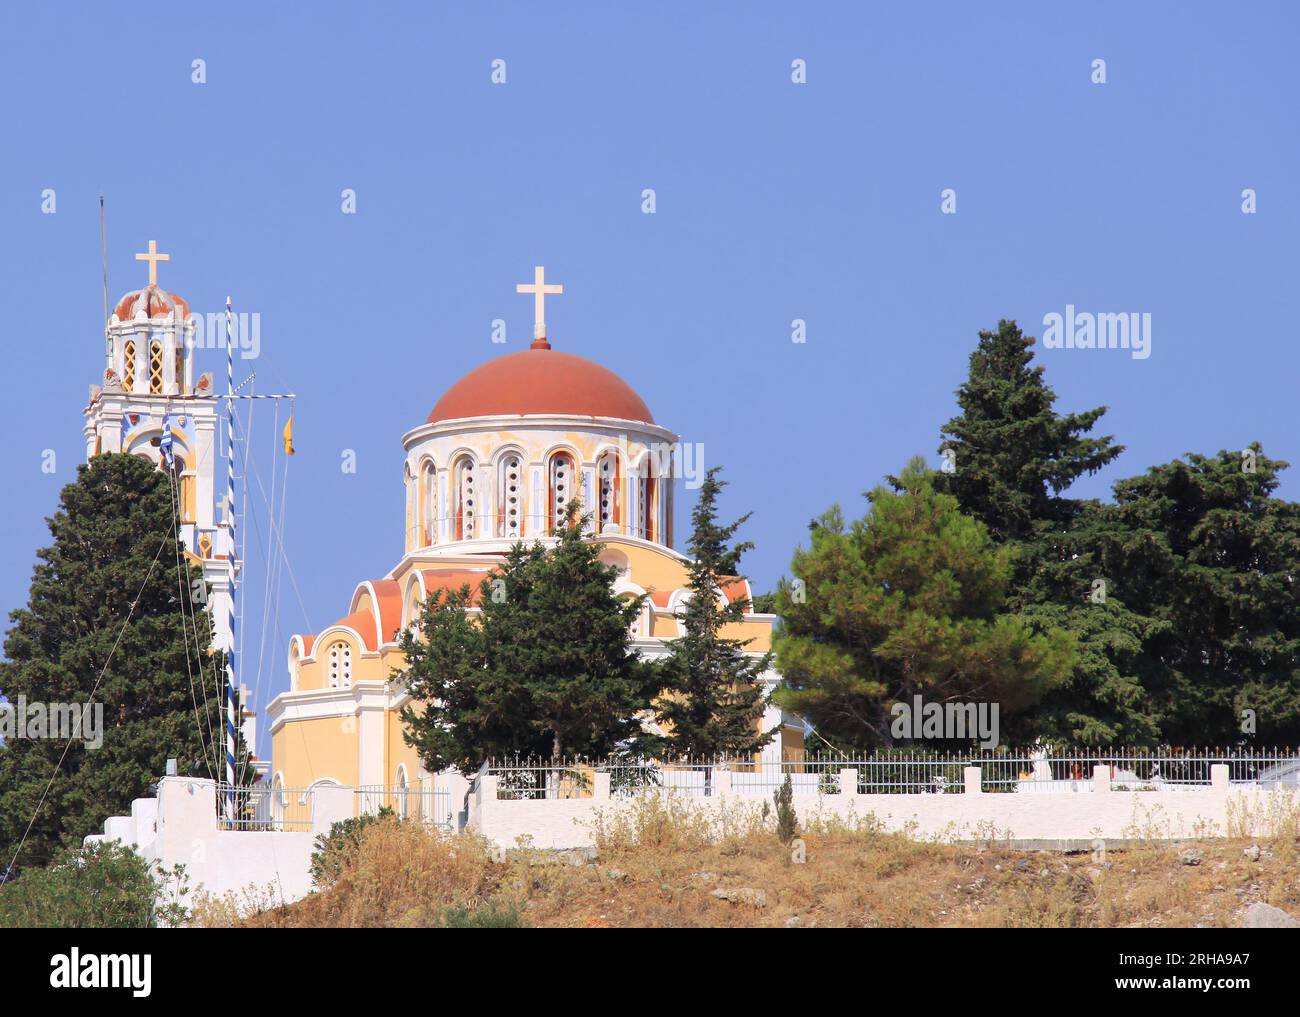 Greek Orthodox Church with Dome and Bell Tower on the Hill in Symi, Greece Stock Photo